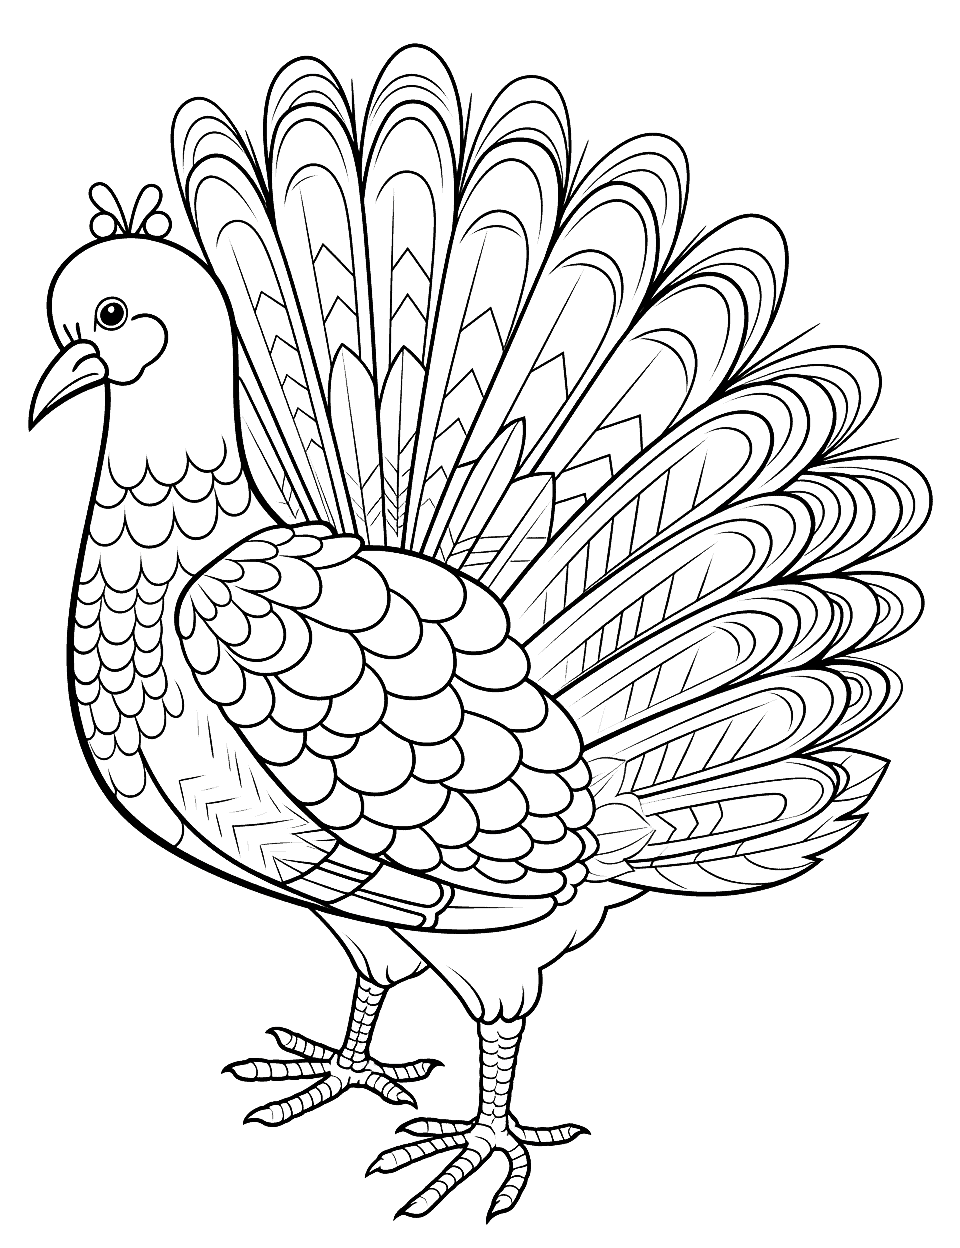 Detailed Feather Turkey Coloring Page - A large turkey with detailed feathers for children who enjoy taking their time coloring.